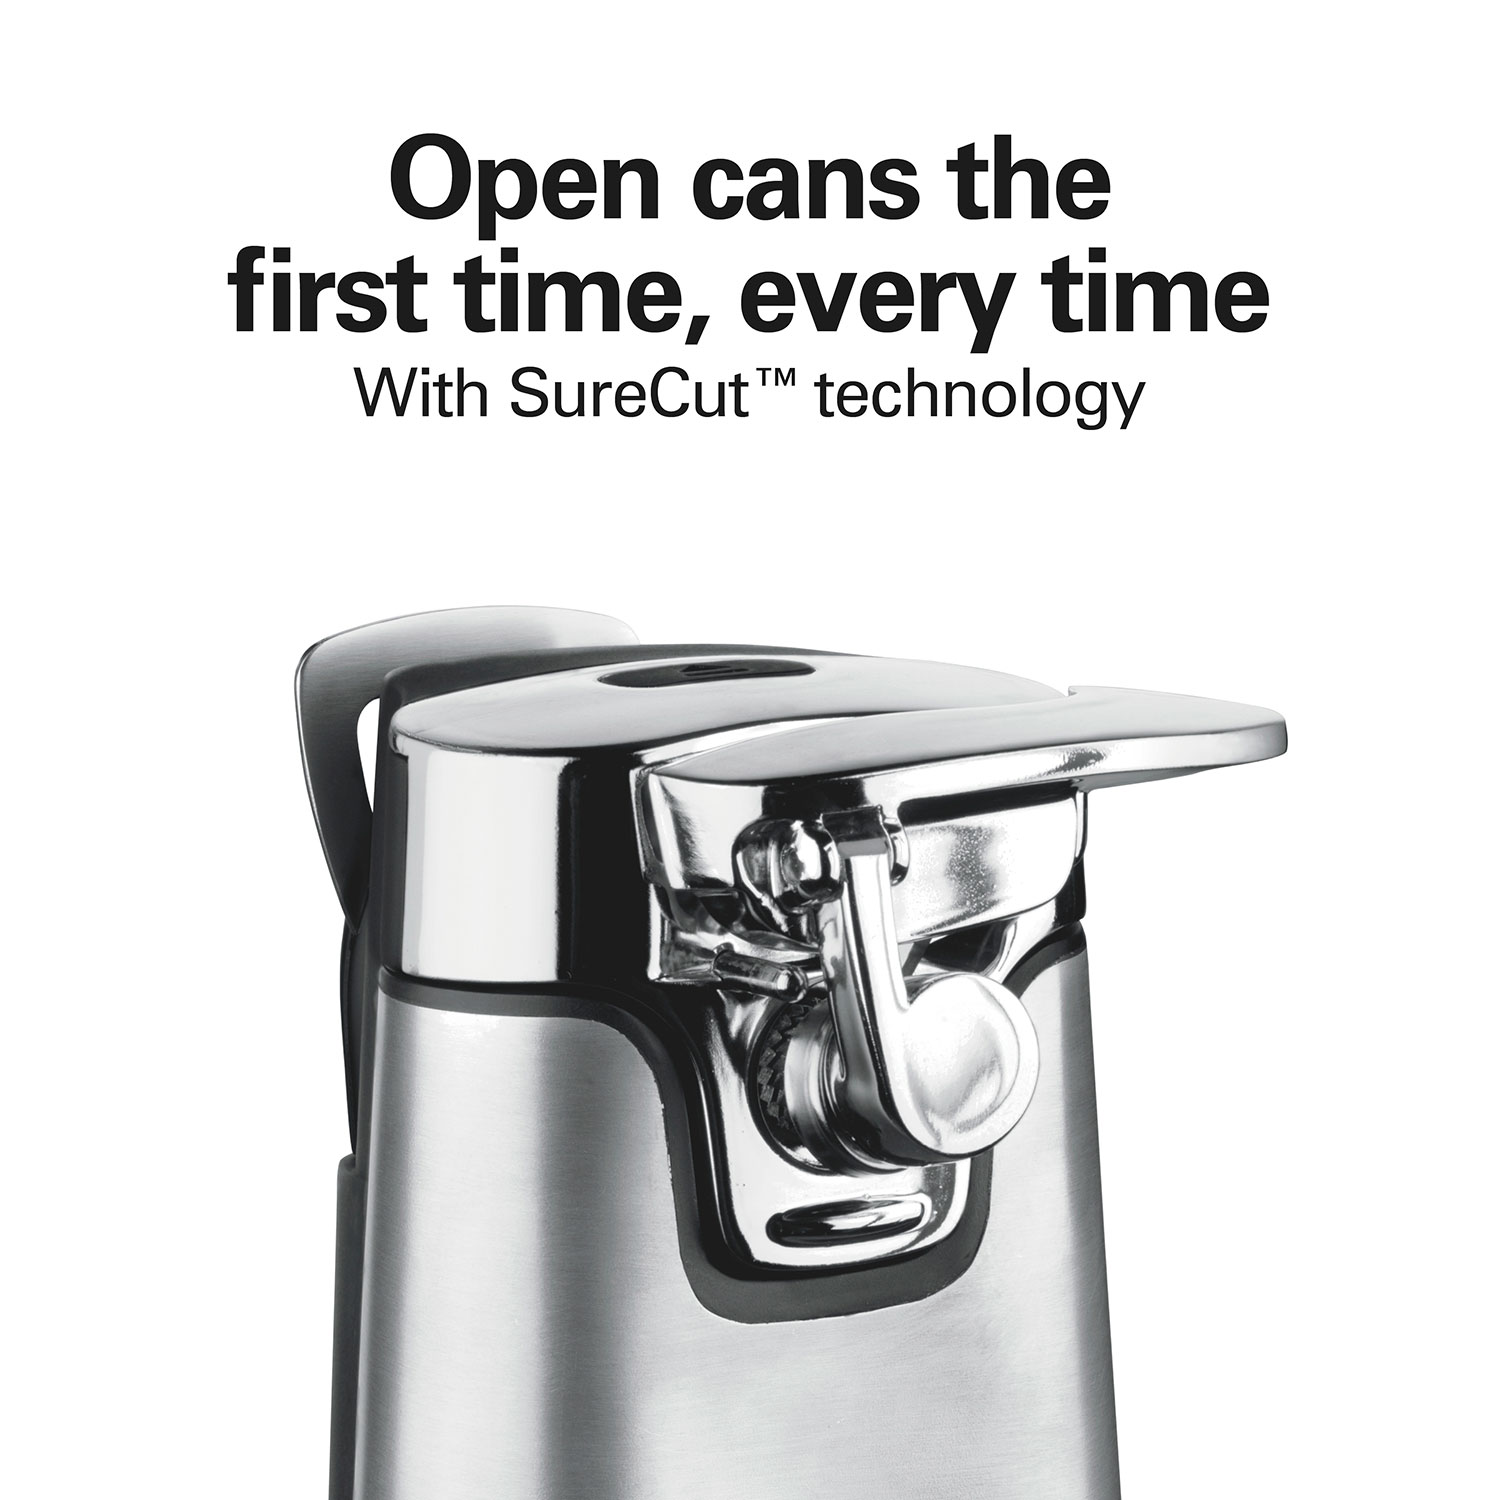 HAMILTON BEACH NEW! Smooth Touch Can Opener #1 BRAND in Can